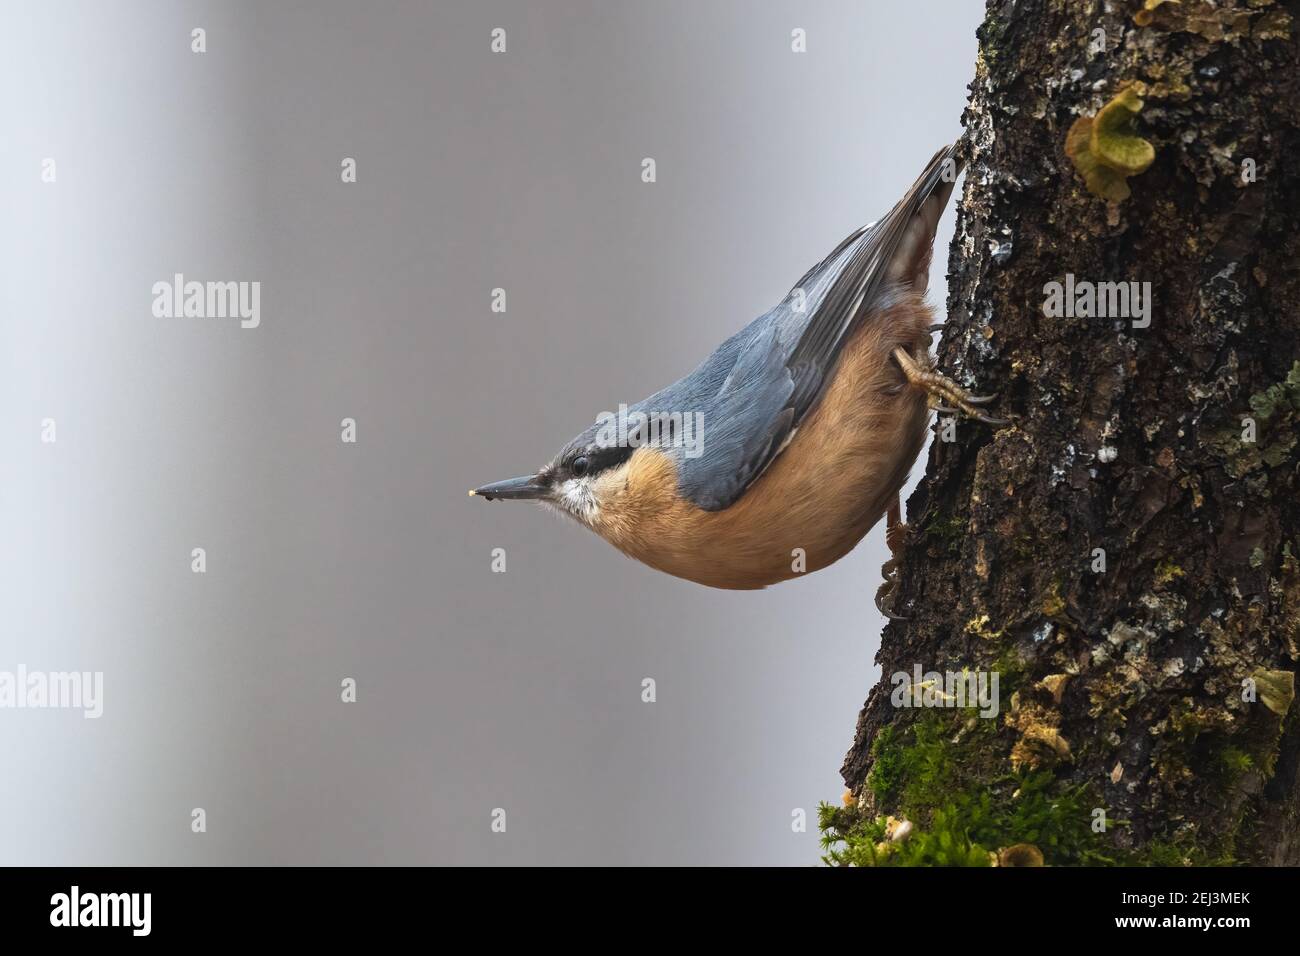 Eurasian nuthatch, Wood nuthatch, Sitta europaea, clinging to a branch Stock Photo